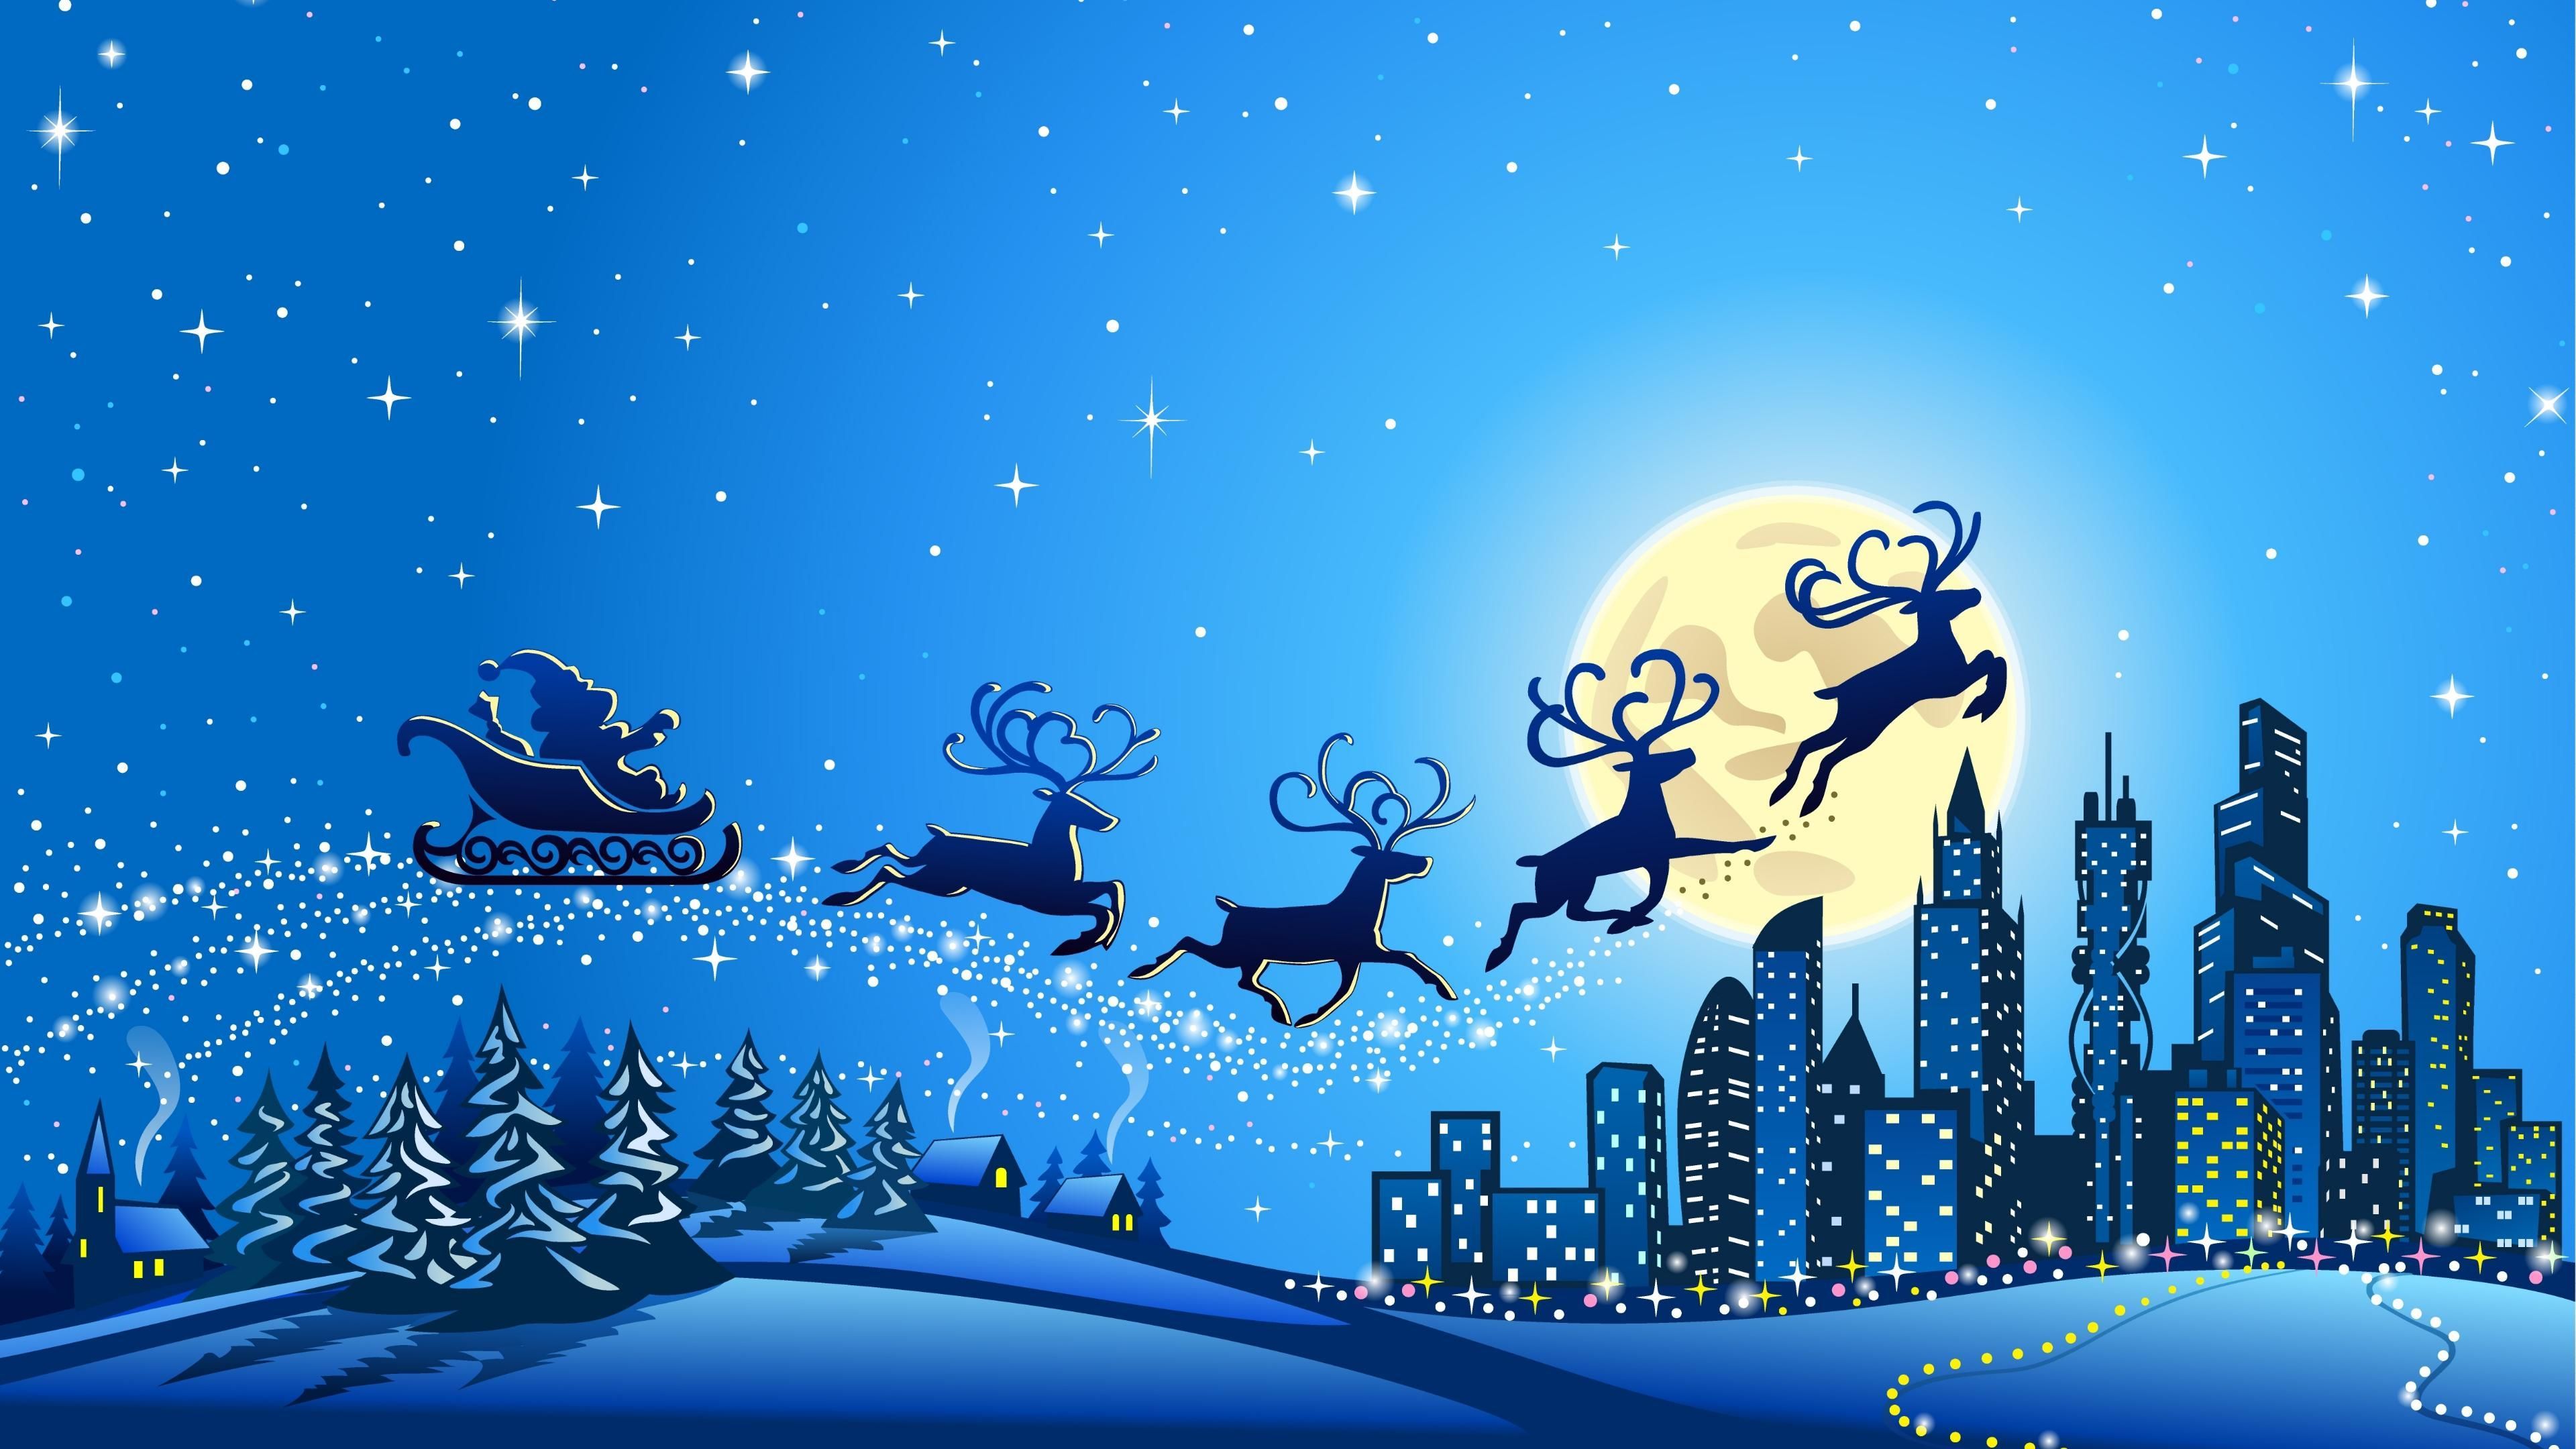 2015 merry Christmas wallpaper hd - images, photos, pictures, pics ...